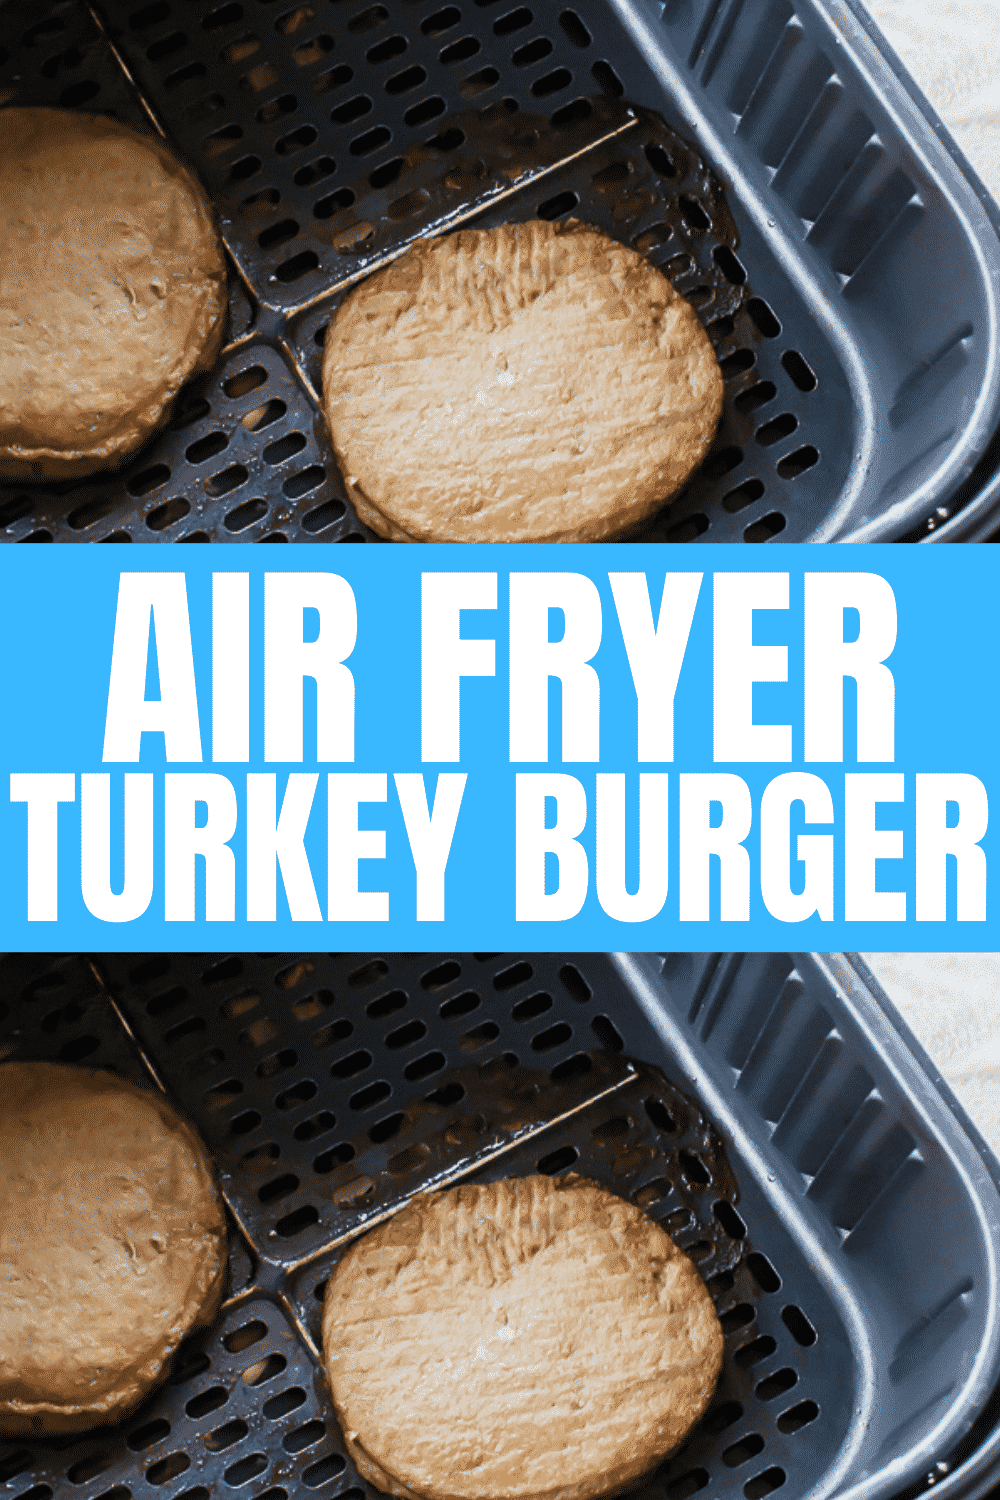 Turkey burger patties in an air fryer basket with overlay text